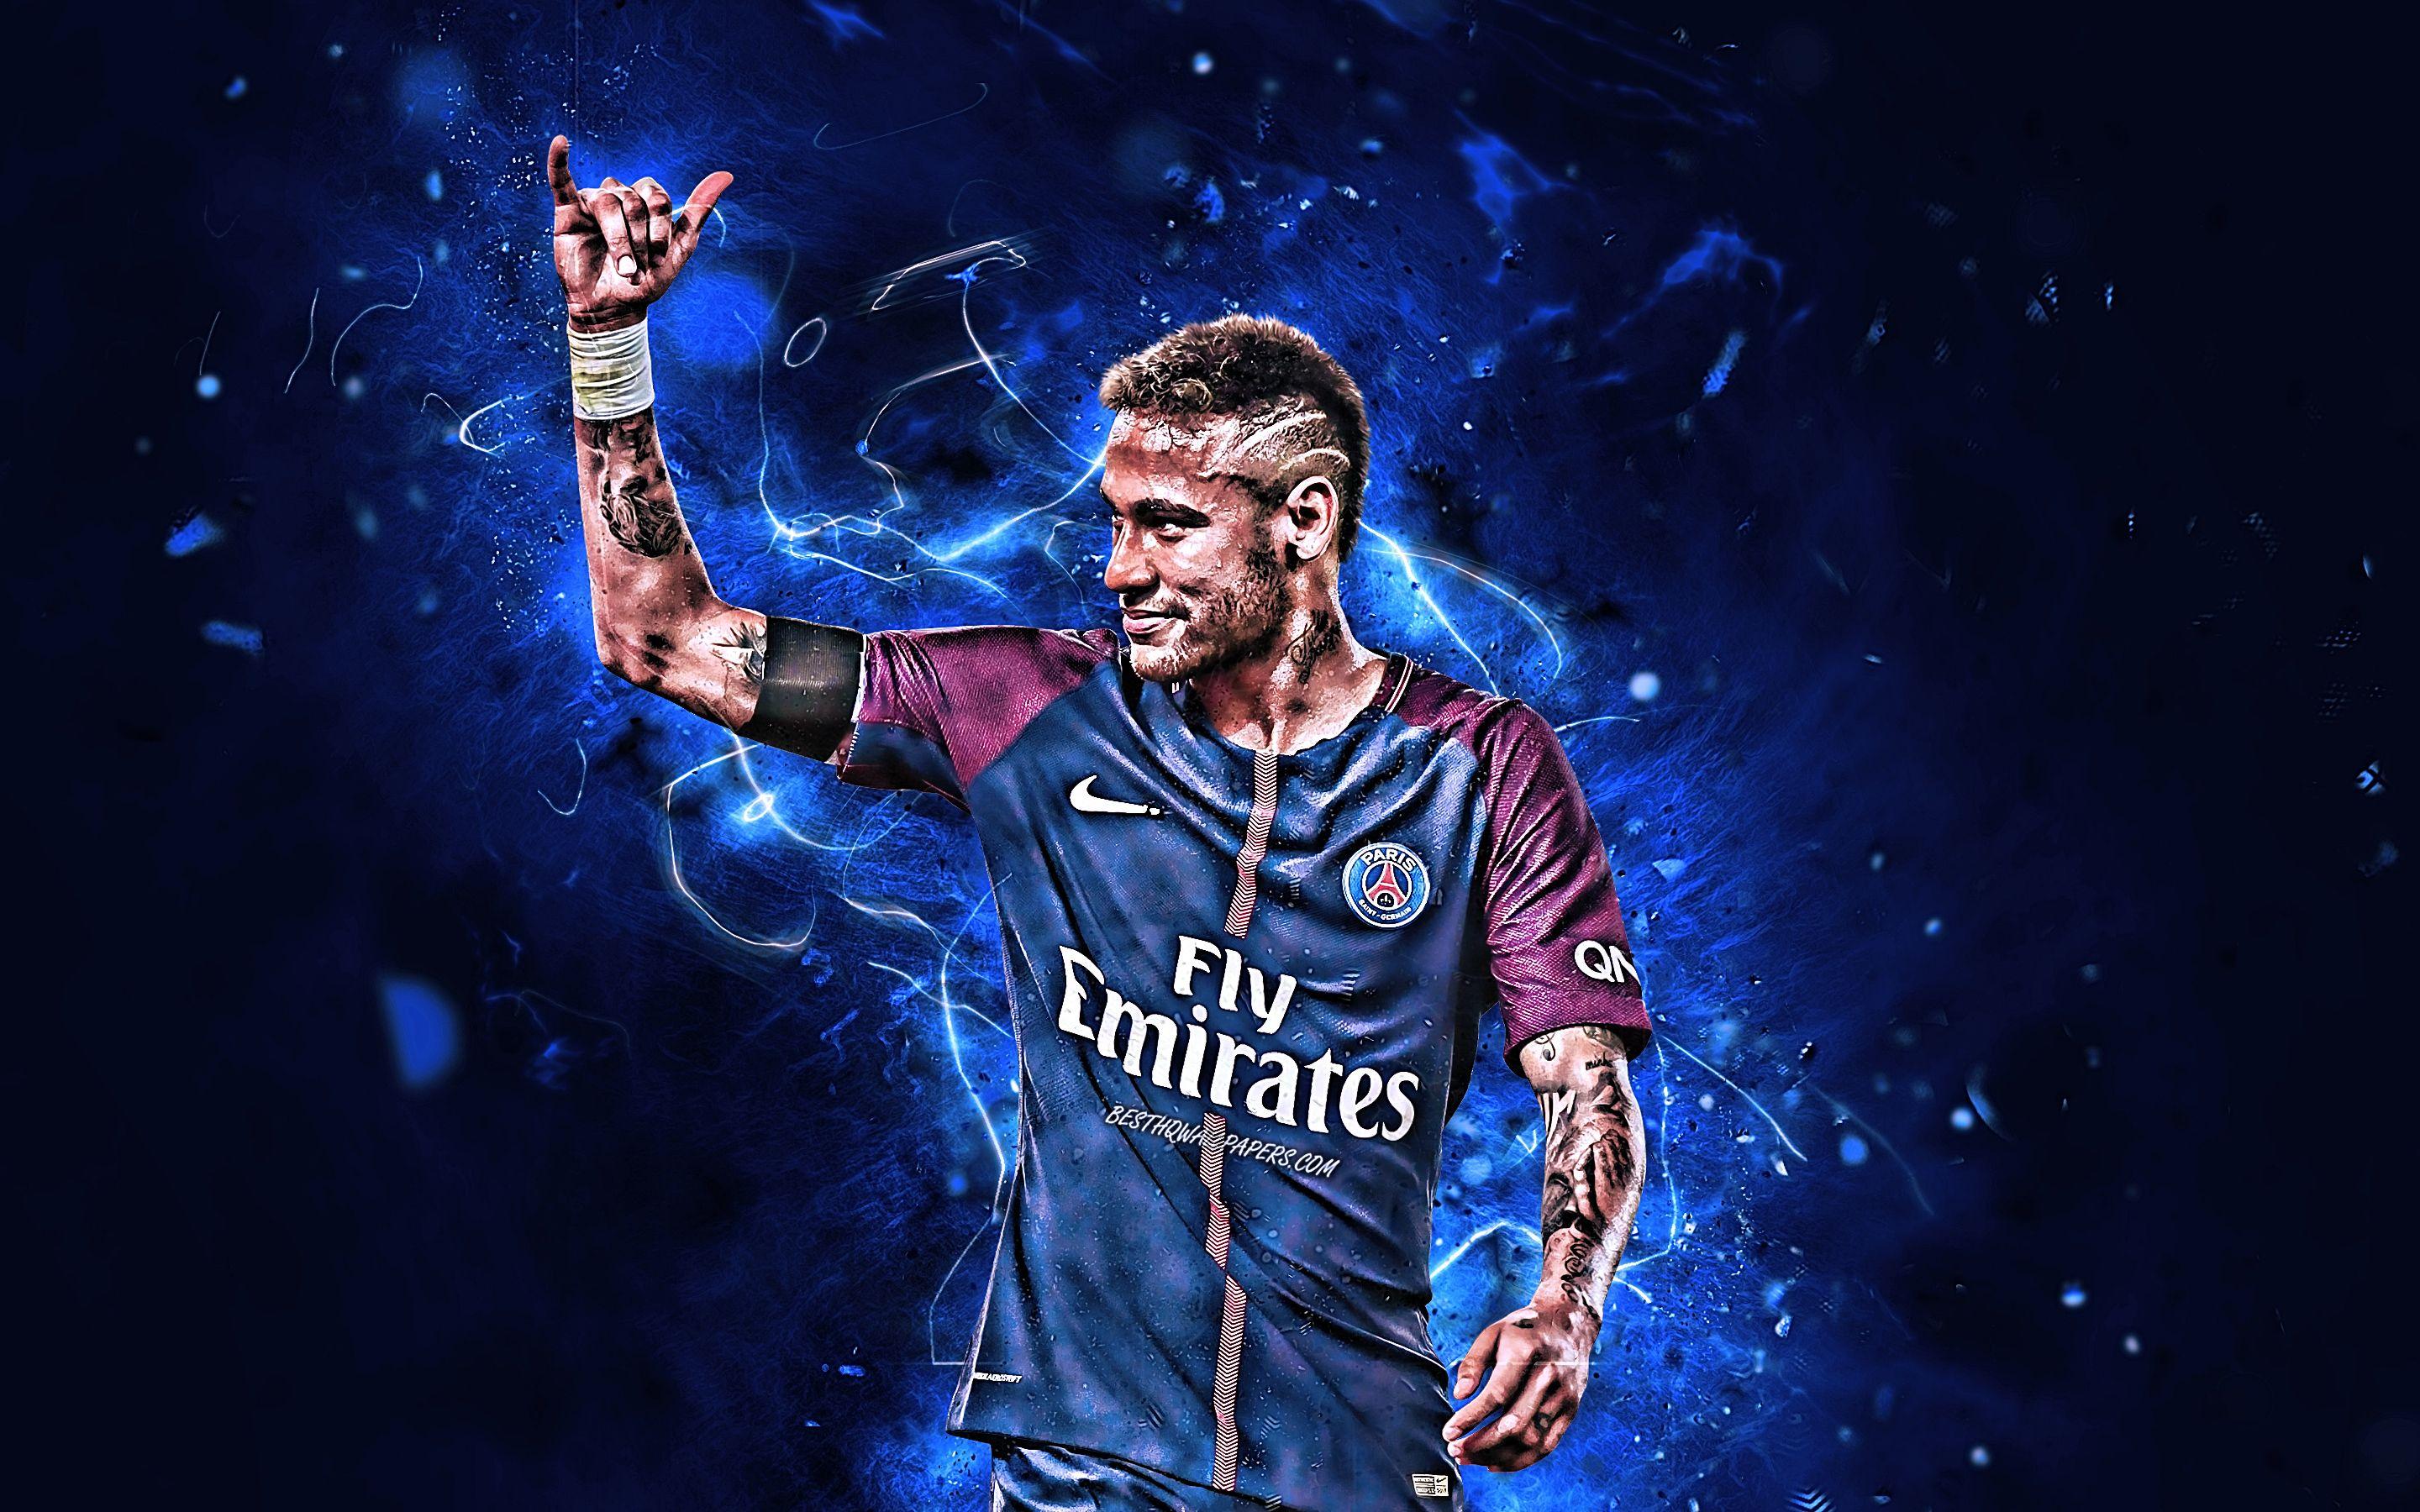 Download wallpapers neymar jr for desktop free High Quality HD pictures  wallpapers  Page 1